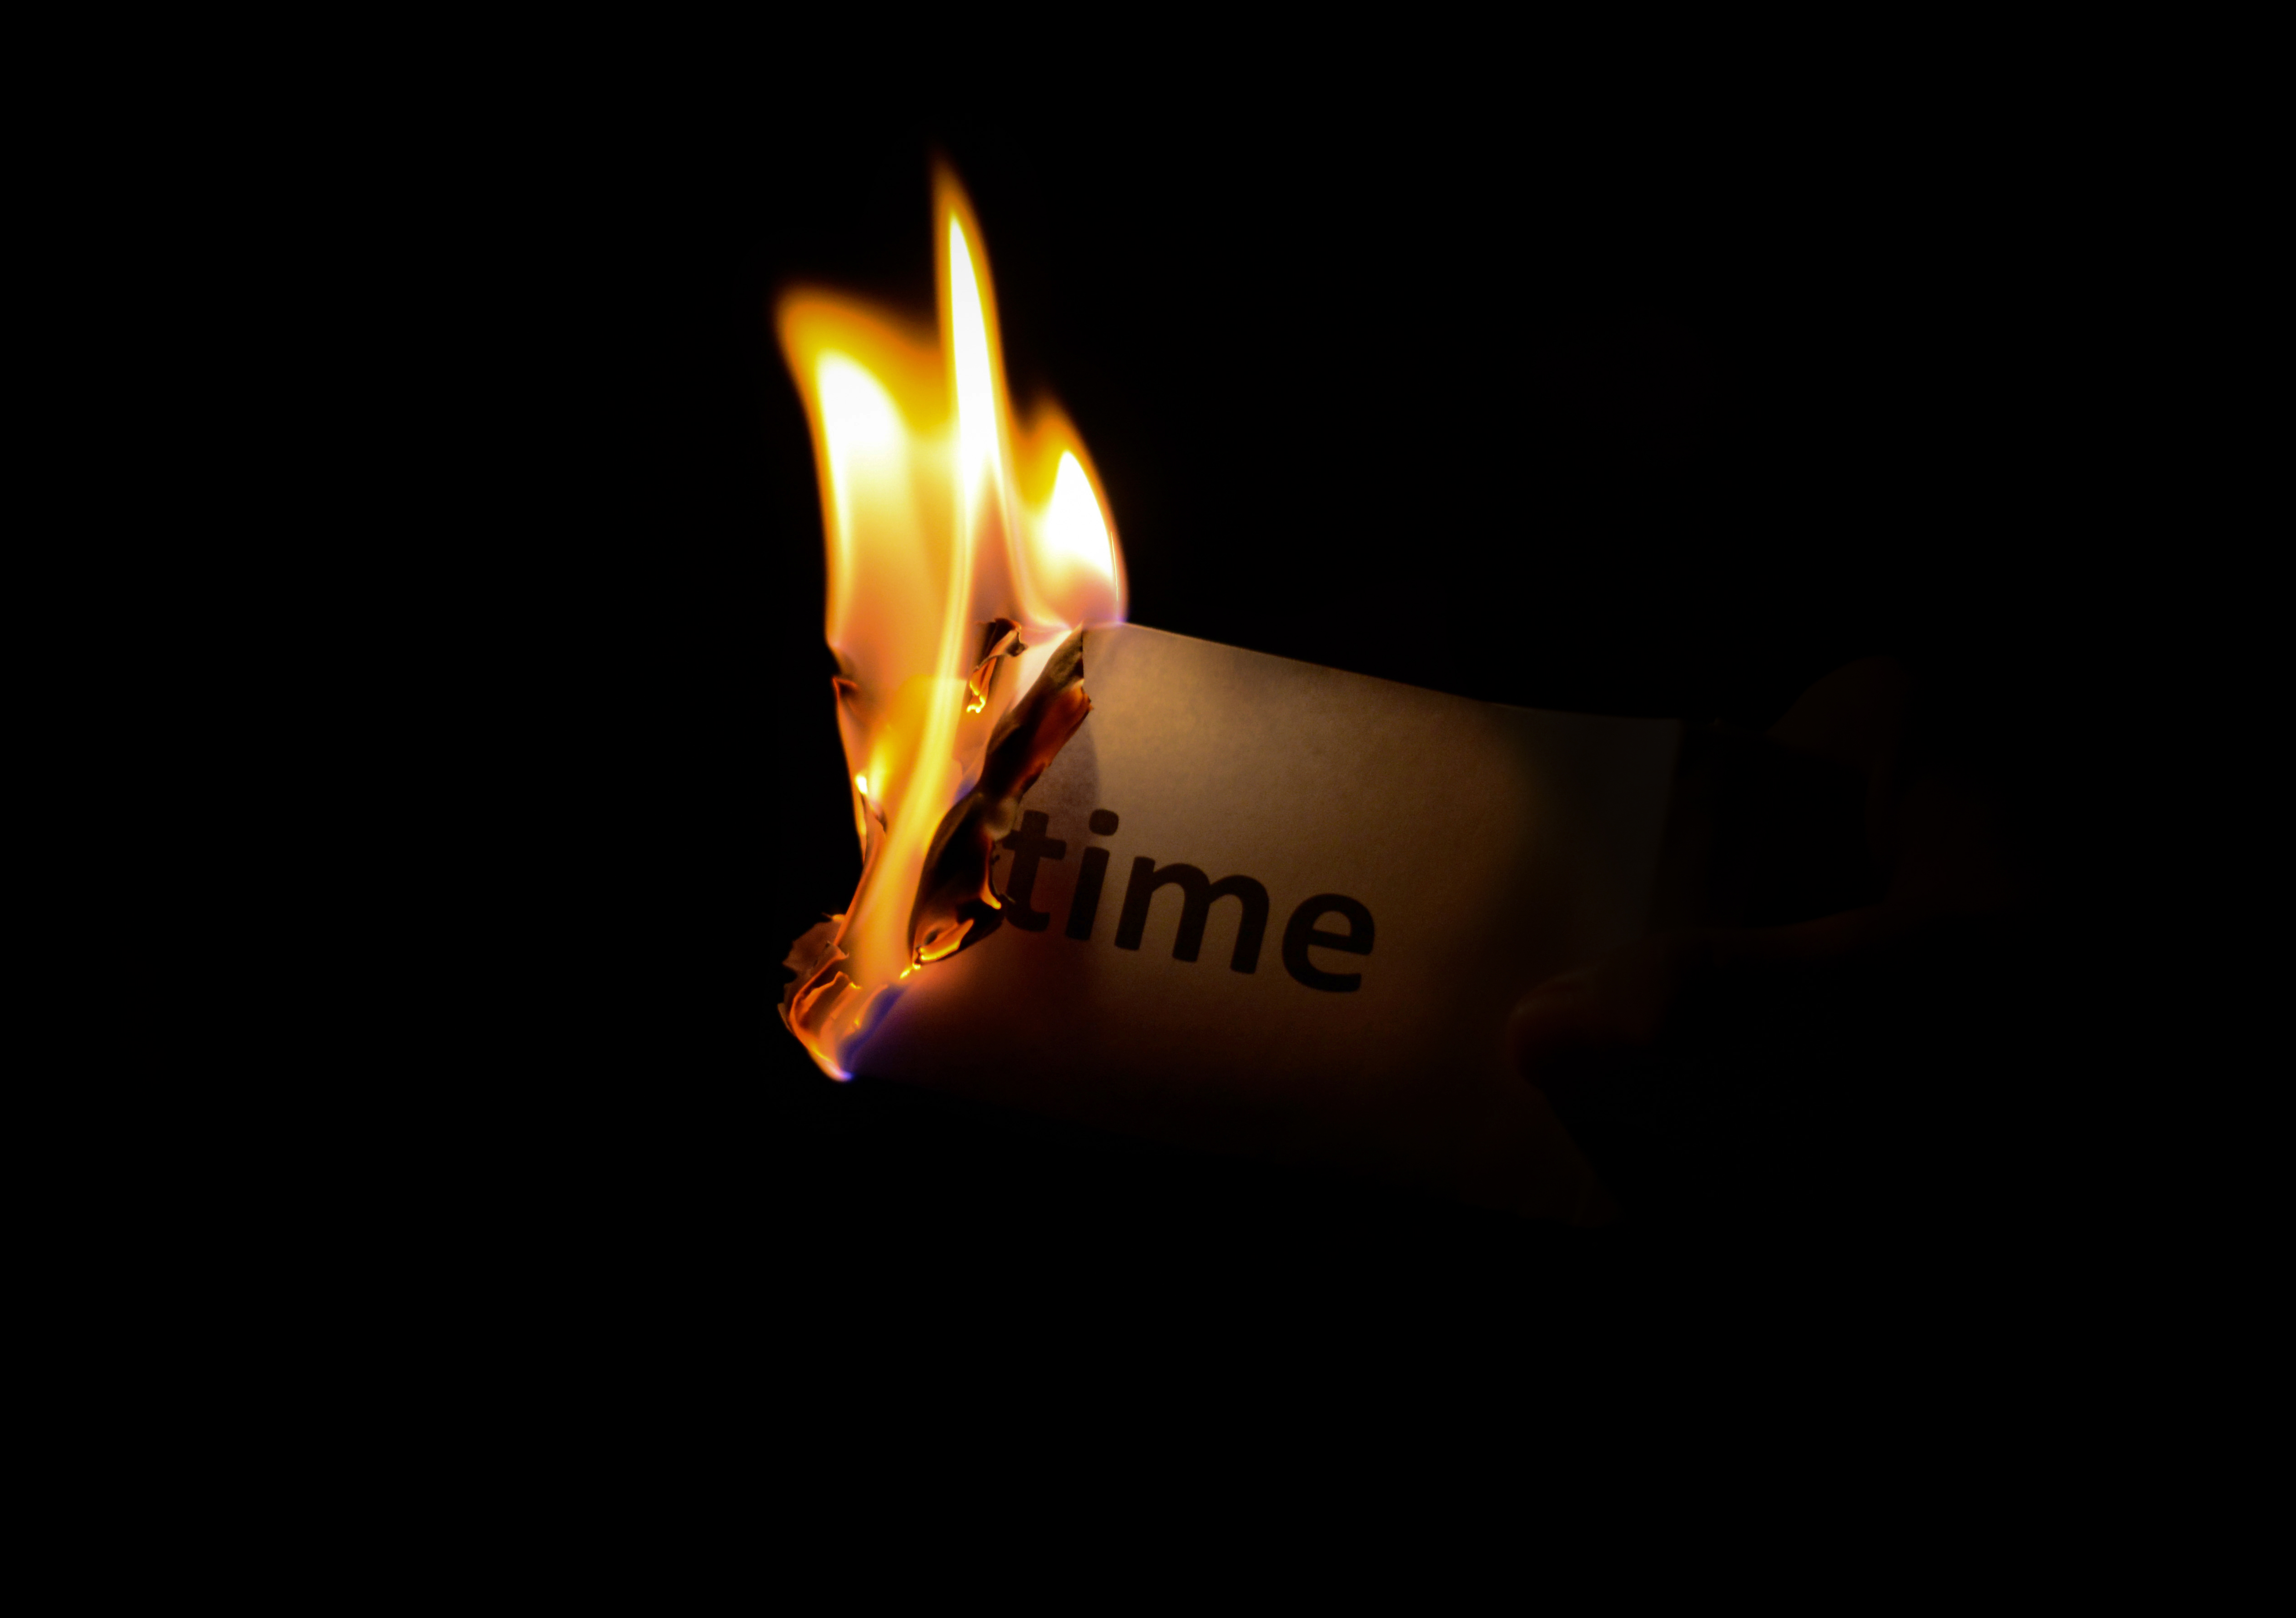 vertical wallpaper words, inspiration, it's time, time, fire